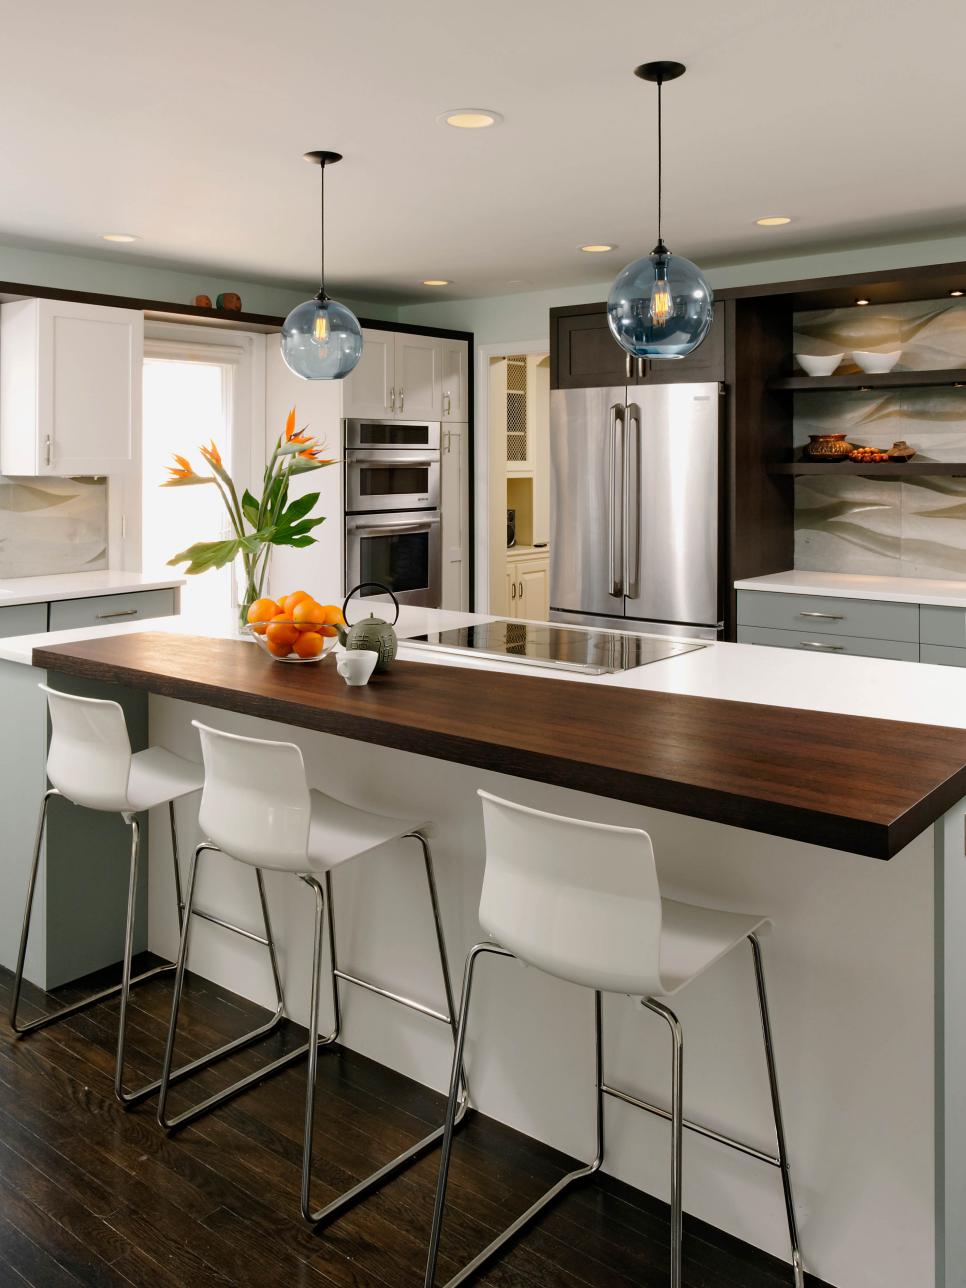 Contemporary Kitchen With Orb Lights and Unique Backsplash 